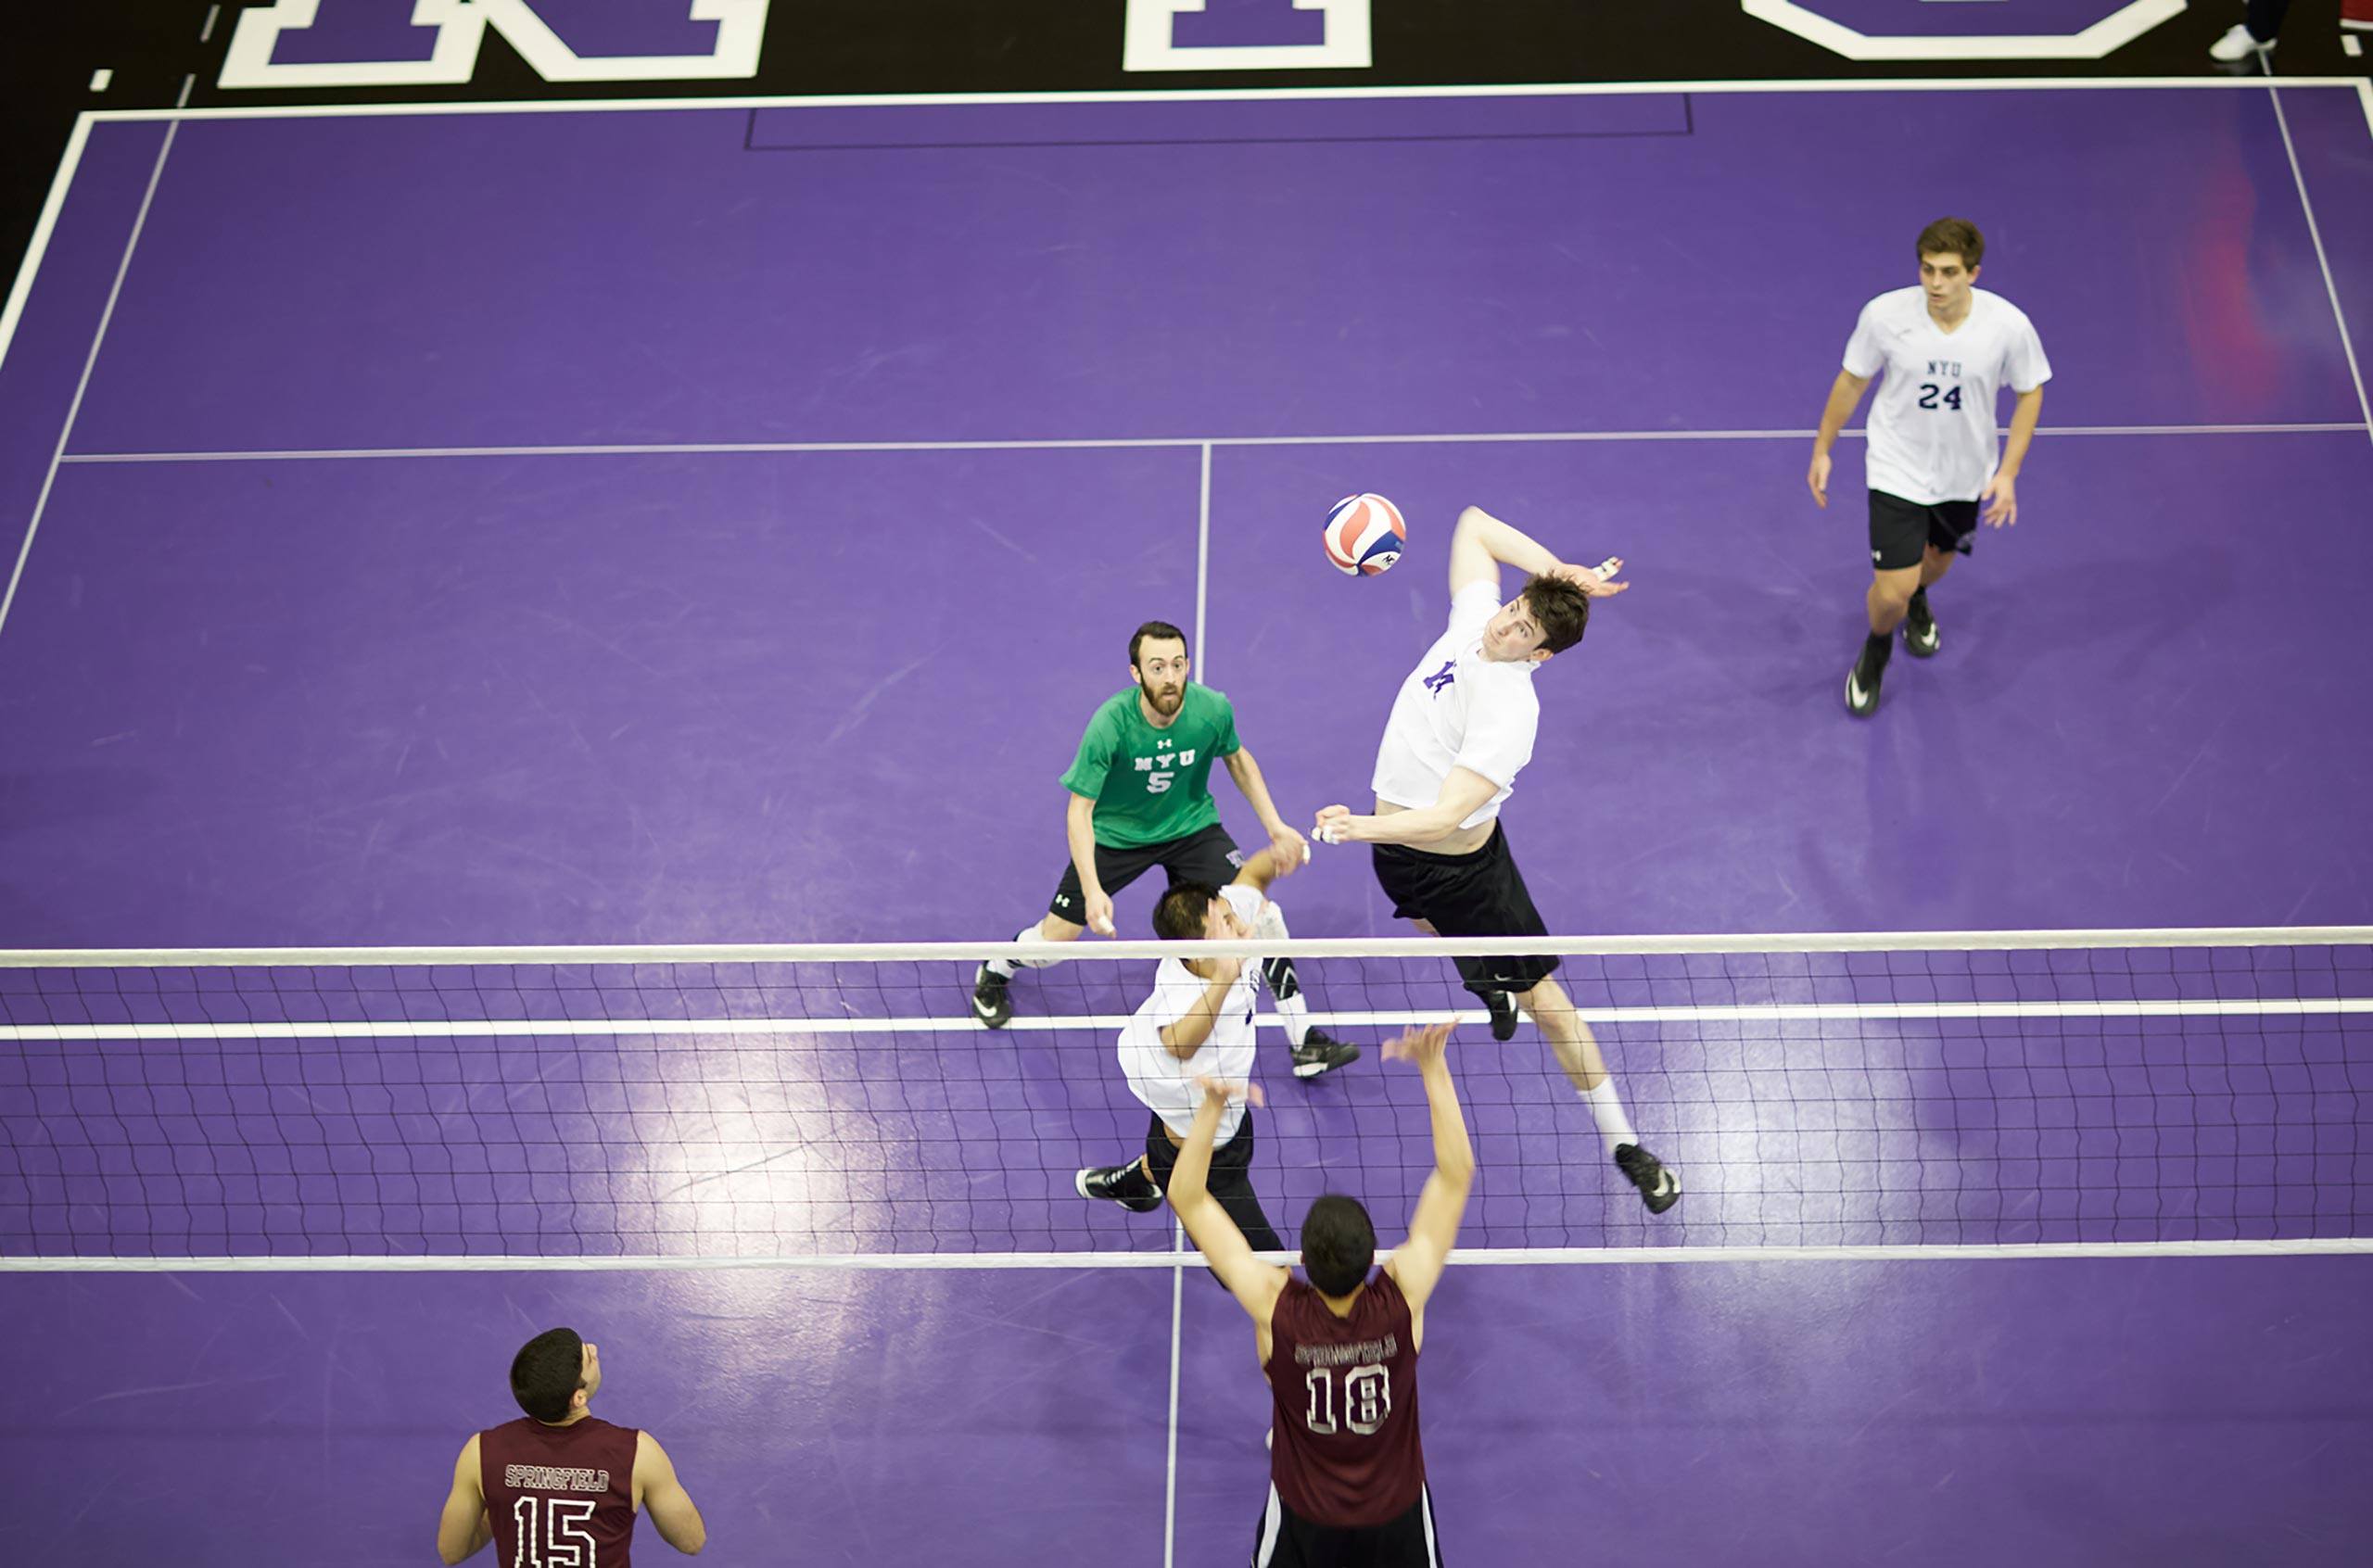 volleyball players on a purple court